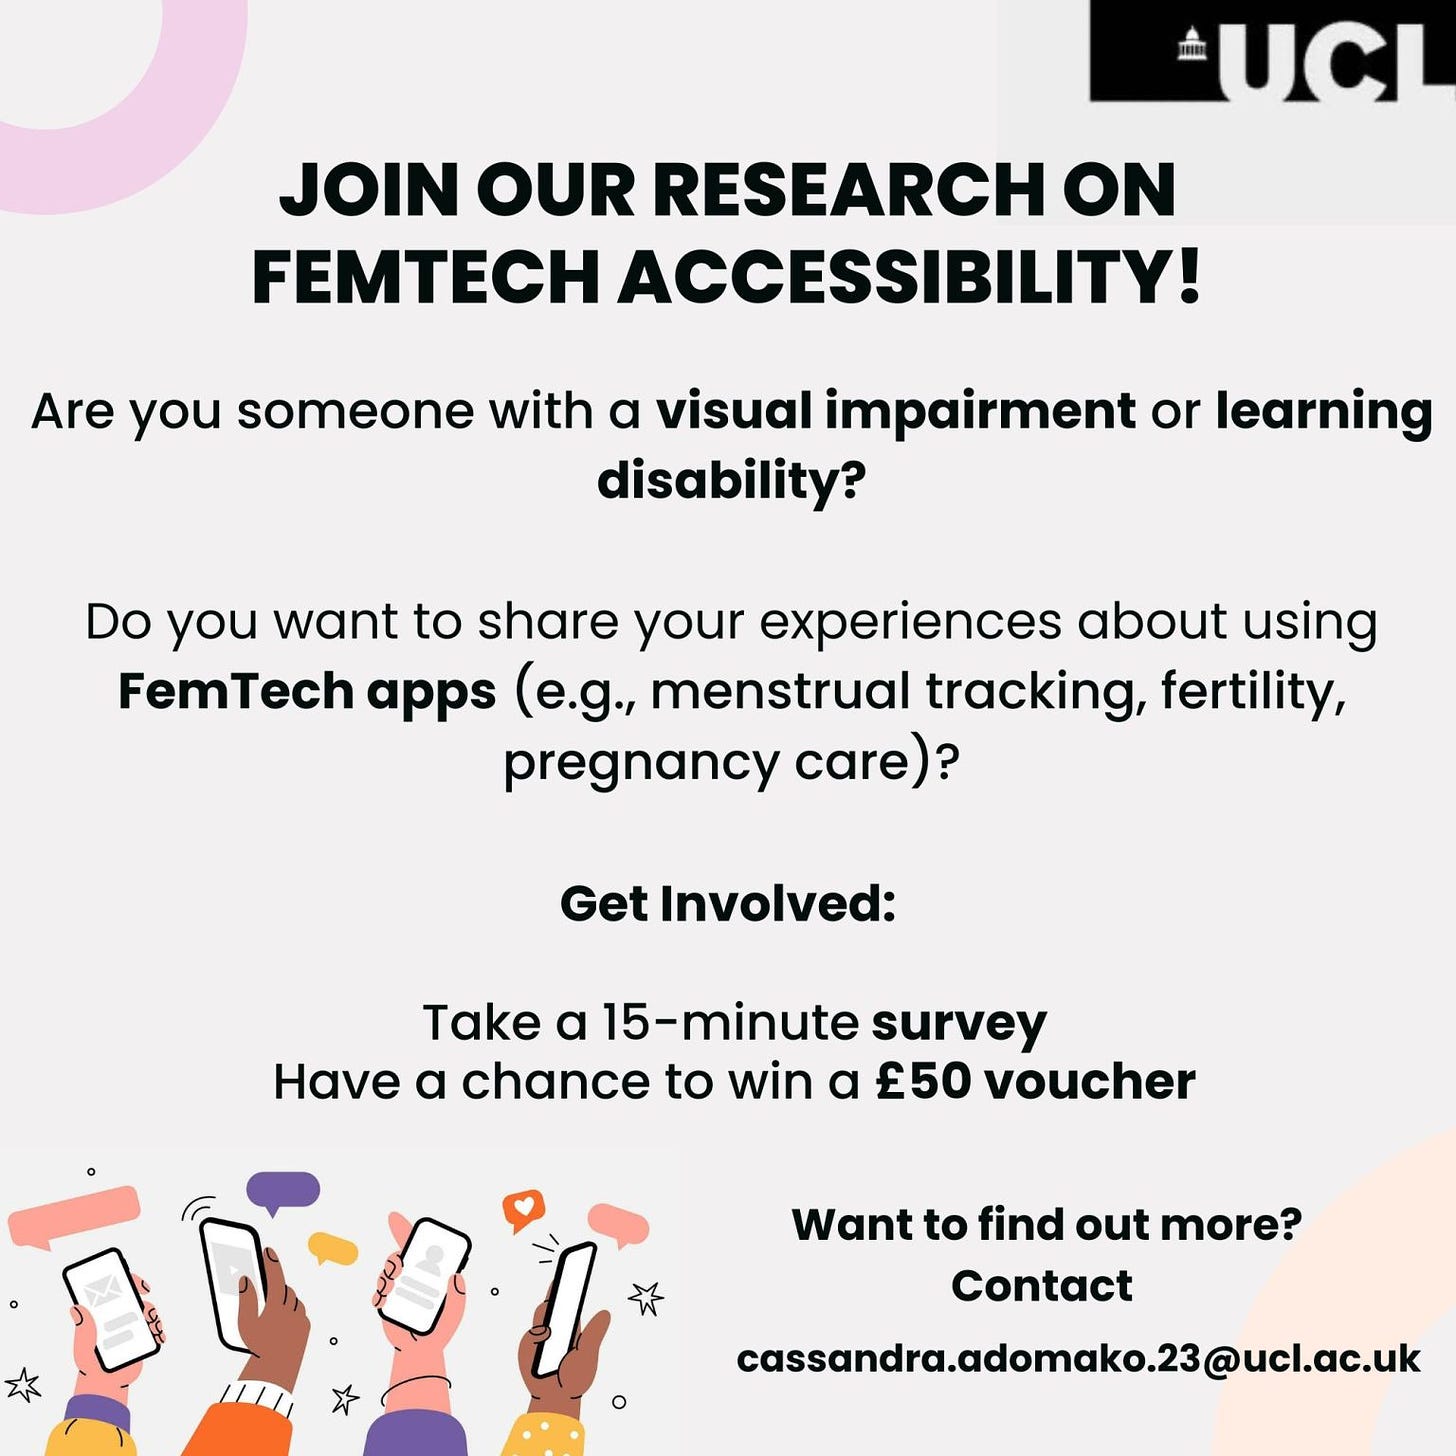 At the top right, there is a UCL logo.

Join Our Research on FemTech Accessibility!

Are you someone with a visual impairment or learning disability?

Do you want to share your experiences about using FemTech apps (e.g., menstrual tracking, fertility, pregnancy care)?

Get Involved:
Take a 15-minute survey
Have a chance to win a £50 voucher

Want to find out more? Contact cassandra.adomako.23@ucl.ac.uk

At the bottom, there are illustrations of diverse hands holding smartphones.
